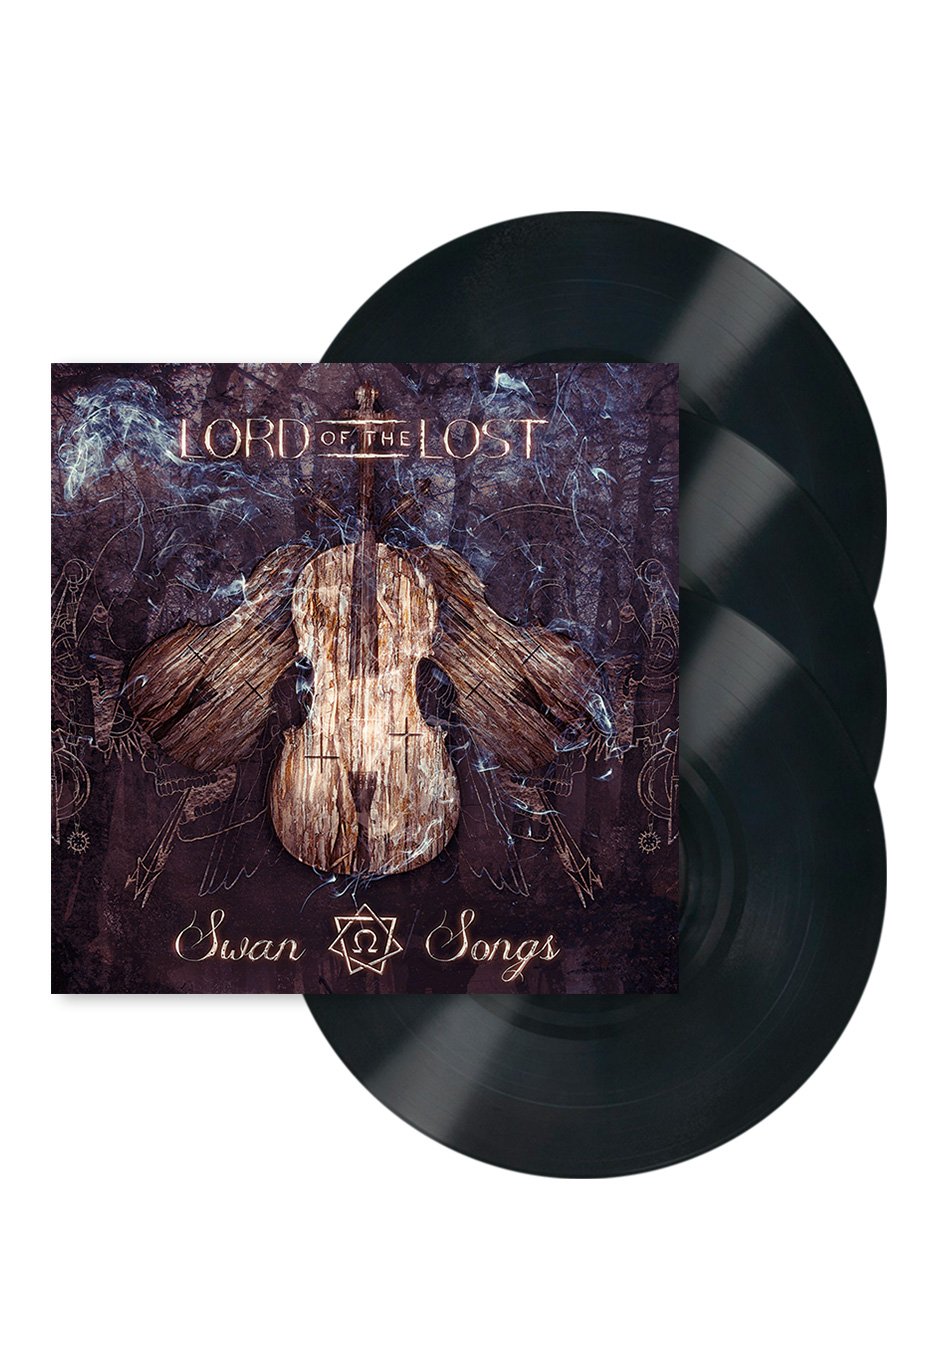 Lord Of The Lost - Swan Songs (10th Anniversary) - 3 Vinyl